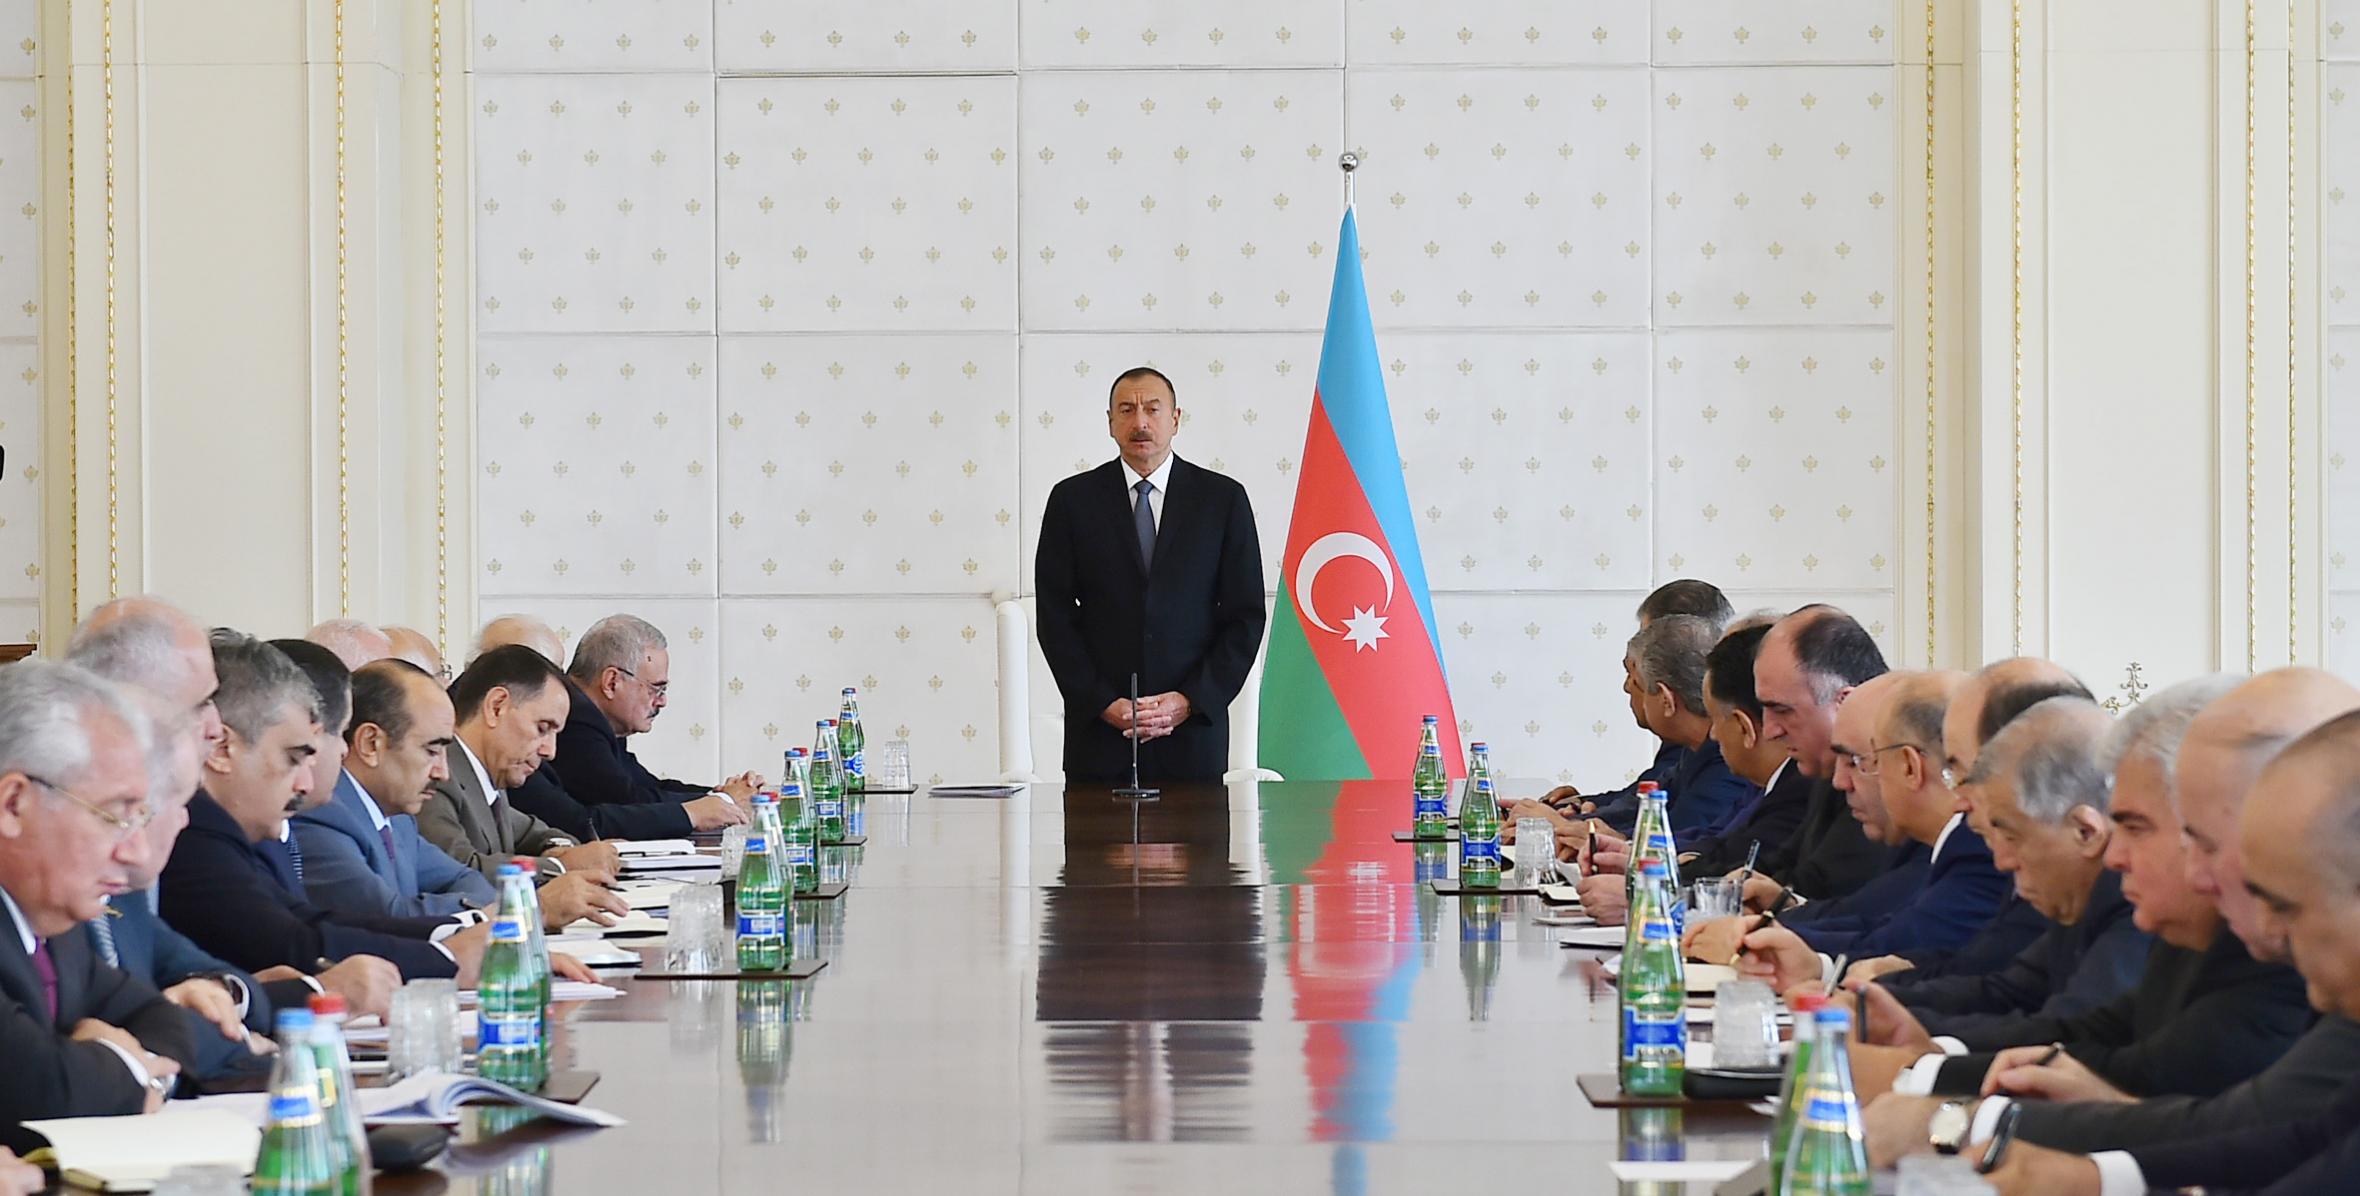 Ilham Aliyev chaired meeting of Cabinet of Ministers on results of socio-economic development in first half of 2016 and future objectives